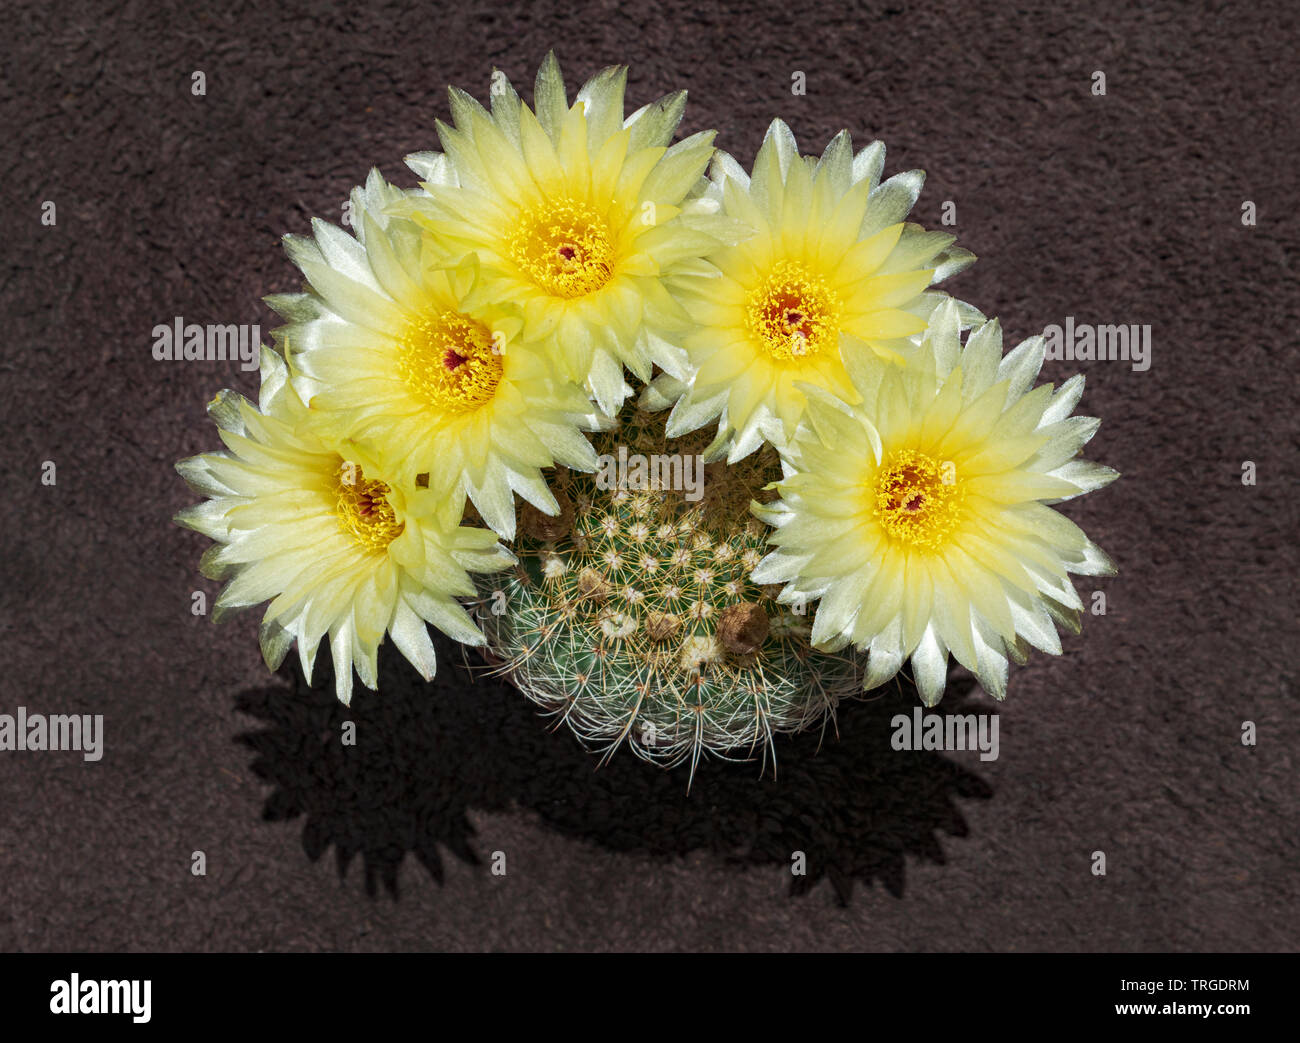 a parodia concinna notocactus apricus viewed from the top showing five dark yellow flowers above the plant with the cactus plant visible under the flo Stock Photo